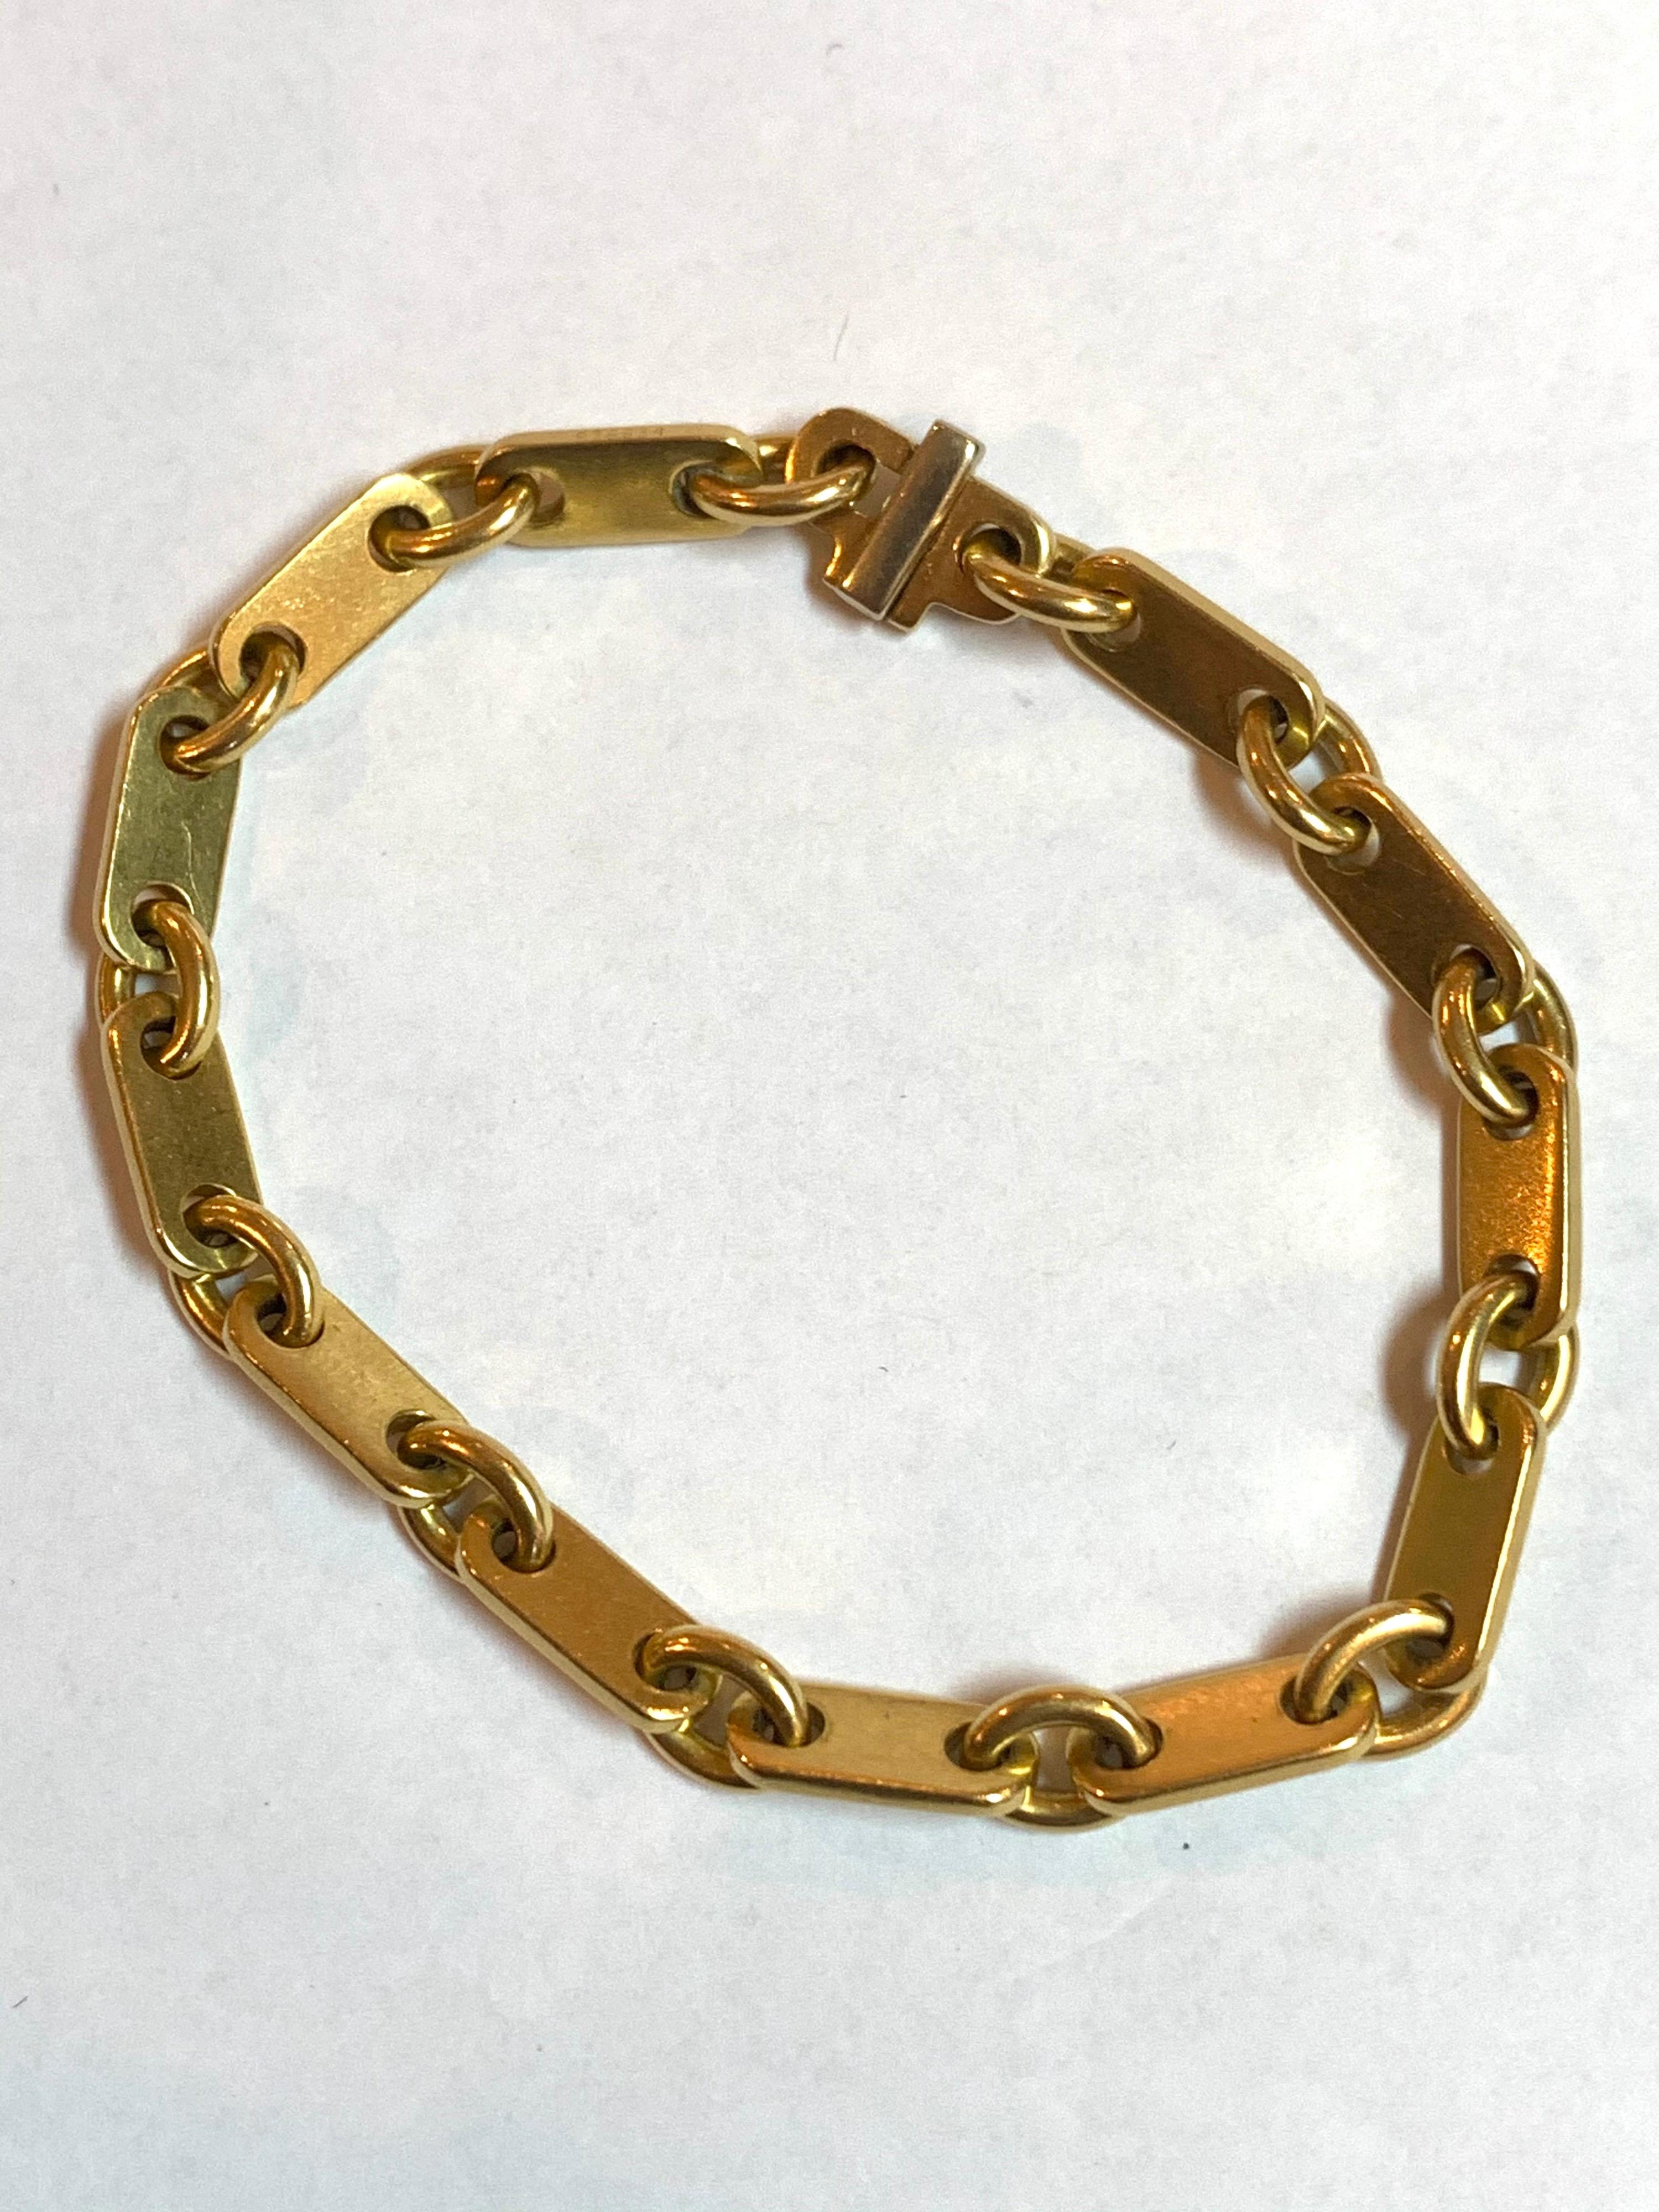 Cartier, 18 Carat Gold Link Bracelet In Good Condition For Sale In Mayfair, GB